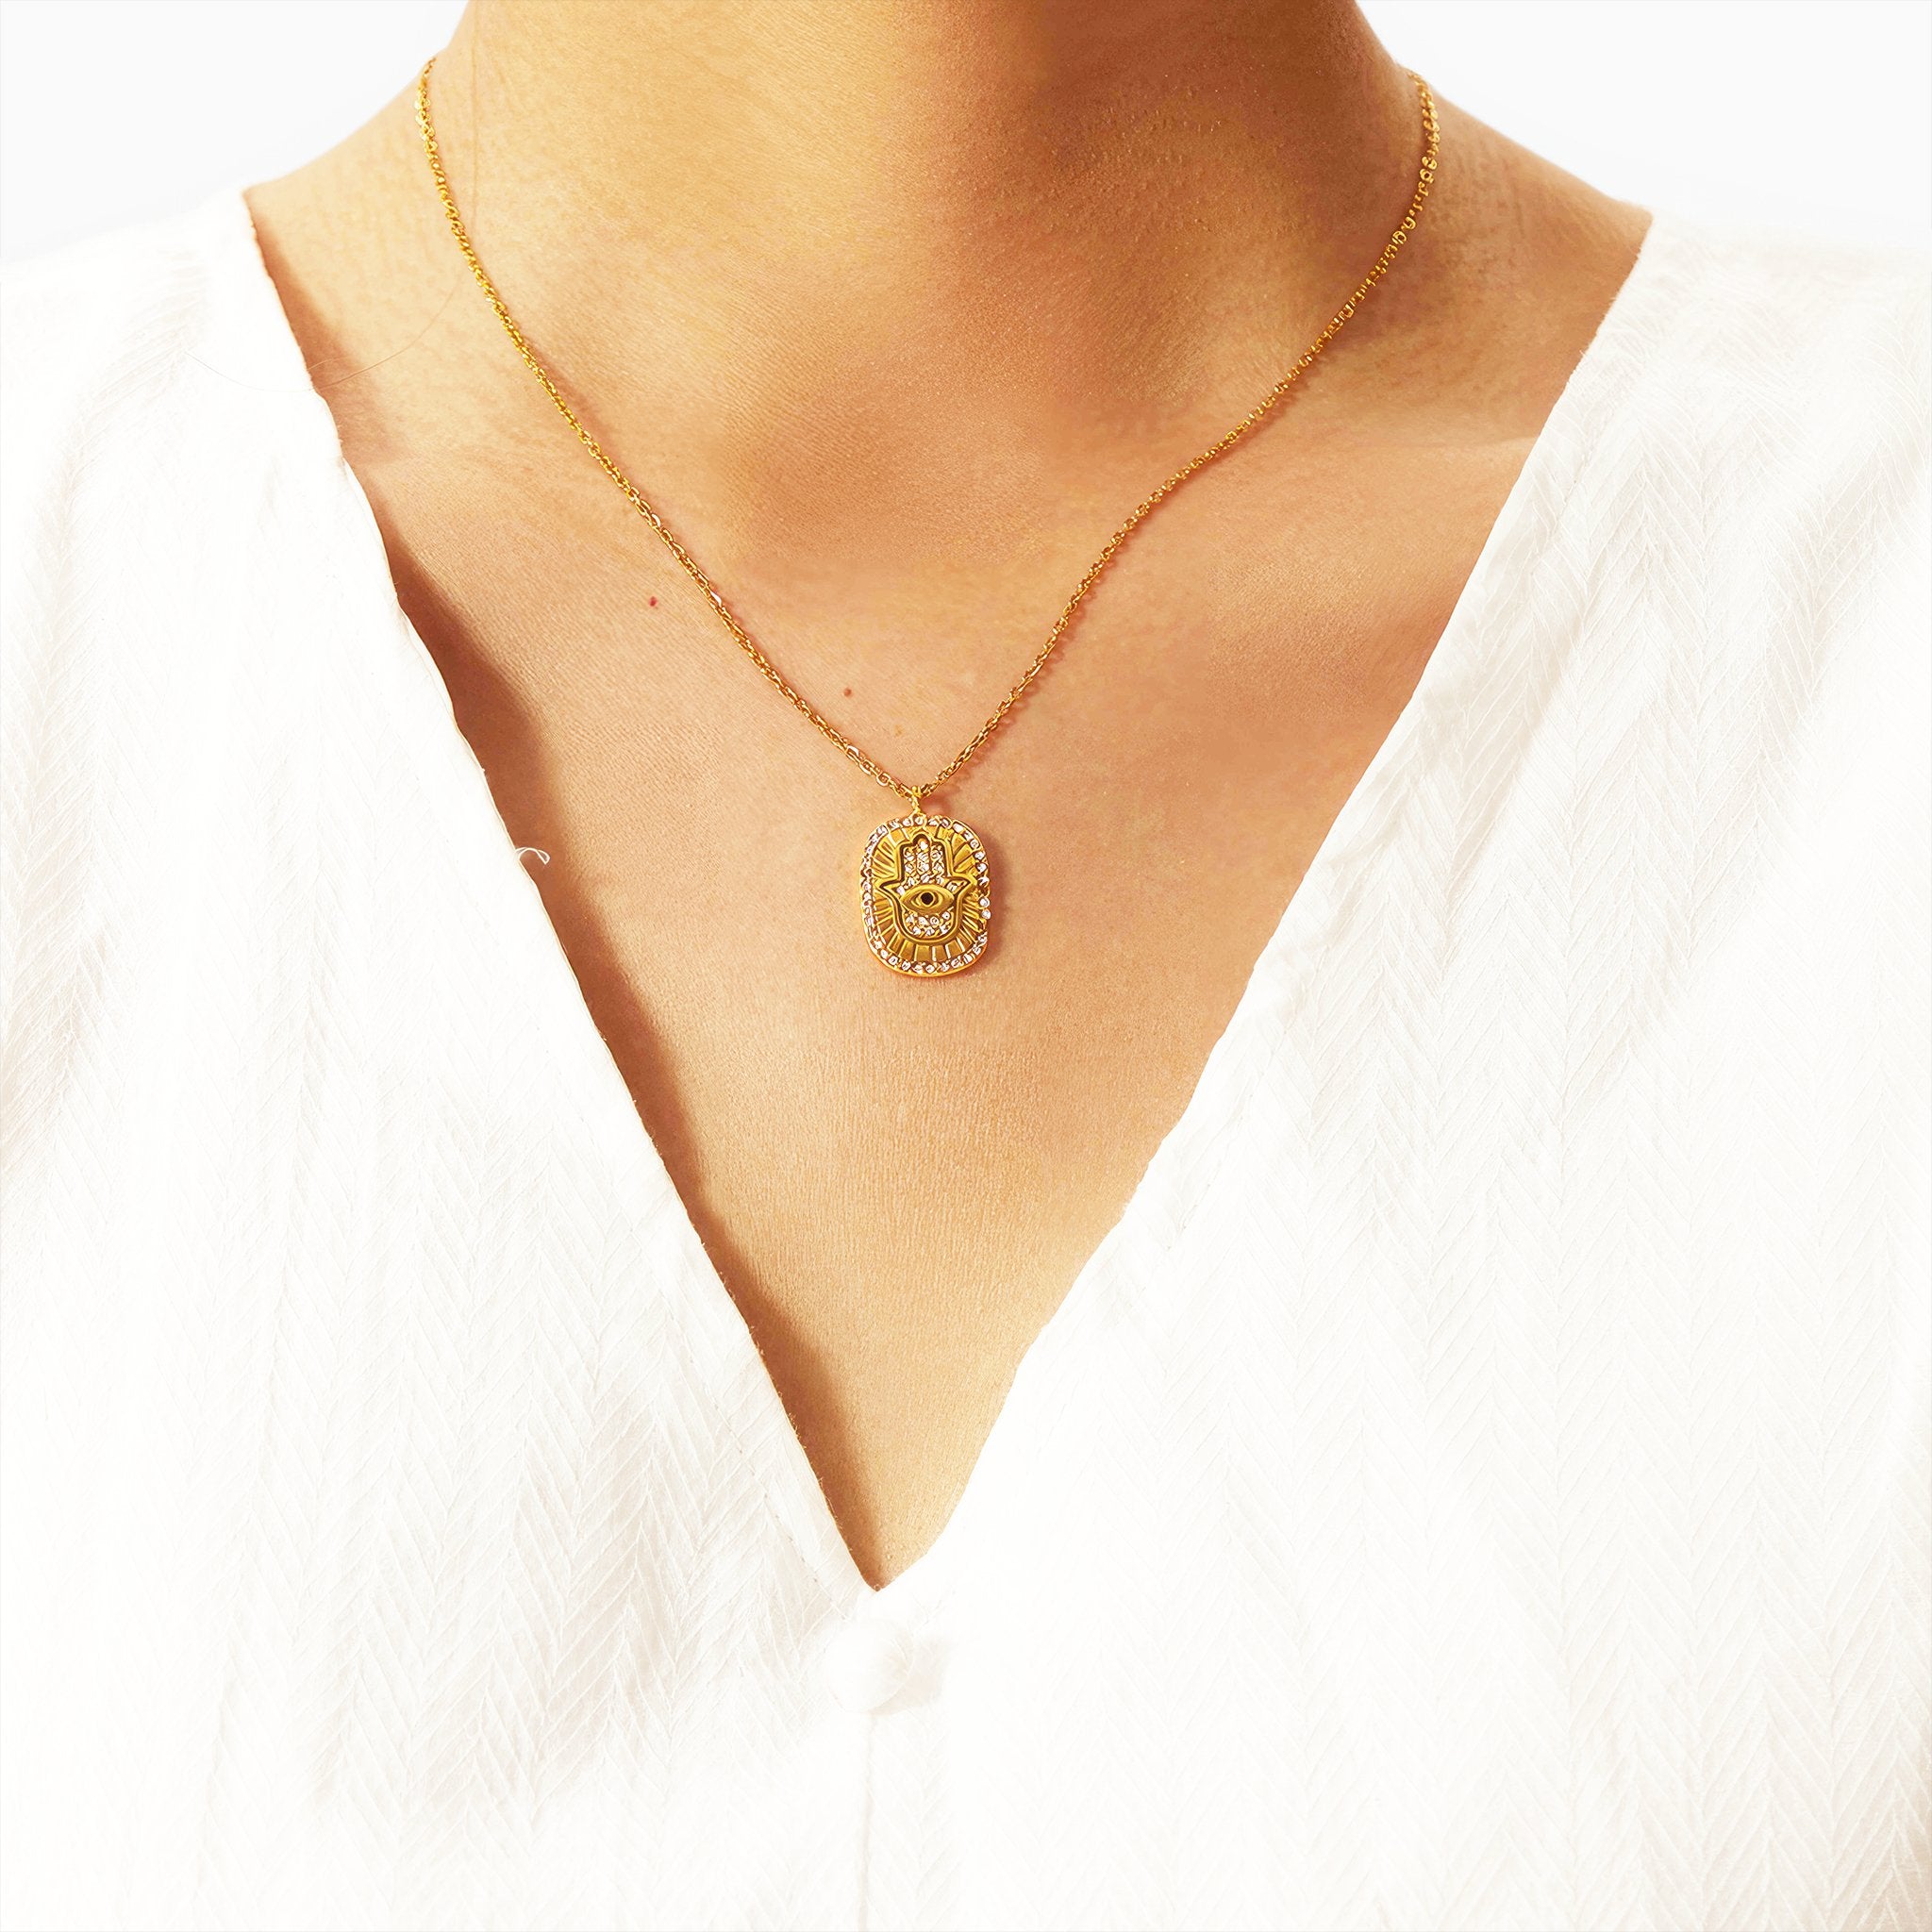 Palm Eye Gemstone Pendant Necklace - Nobbier - Necklace - 18K Gold And Titanium PVD Coated Jewelry